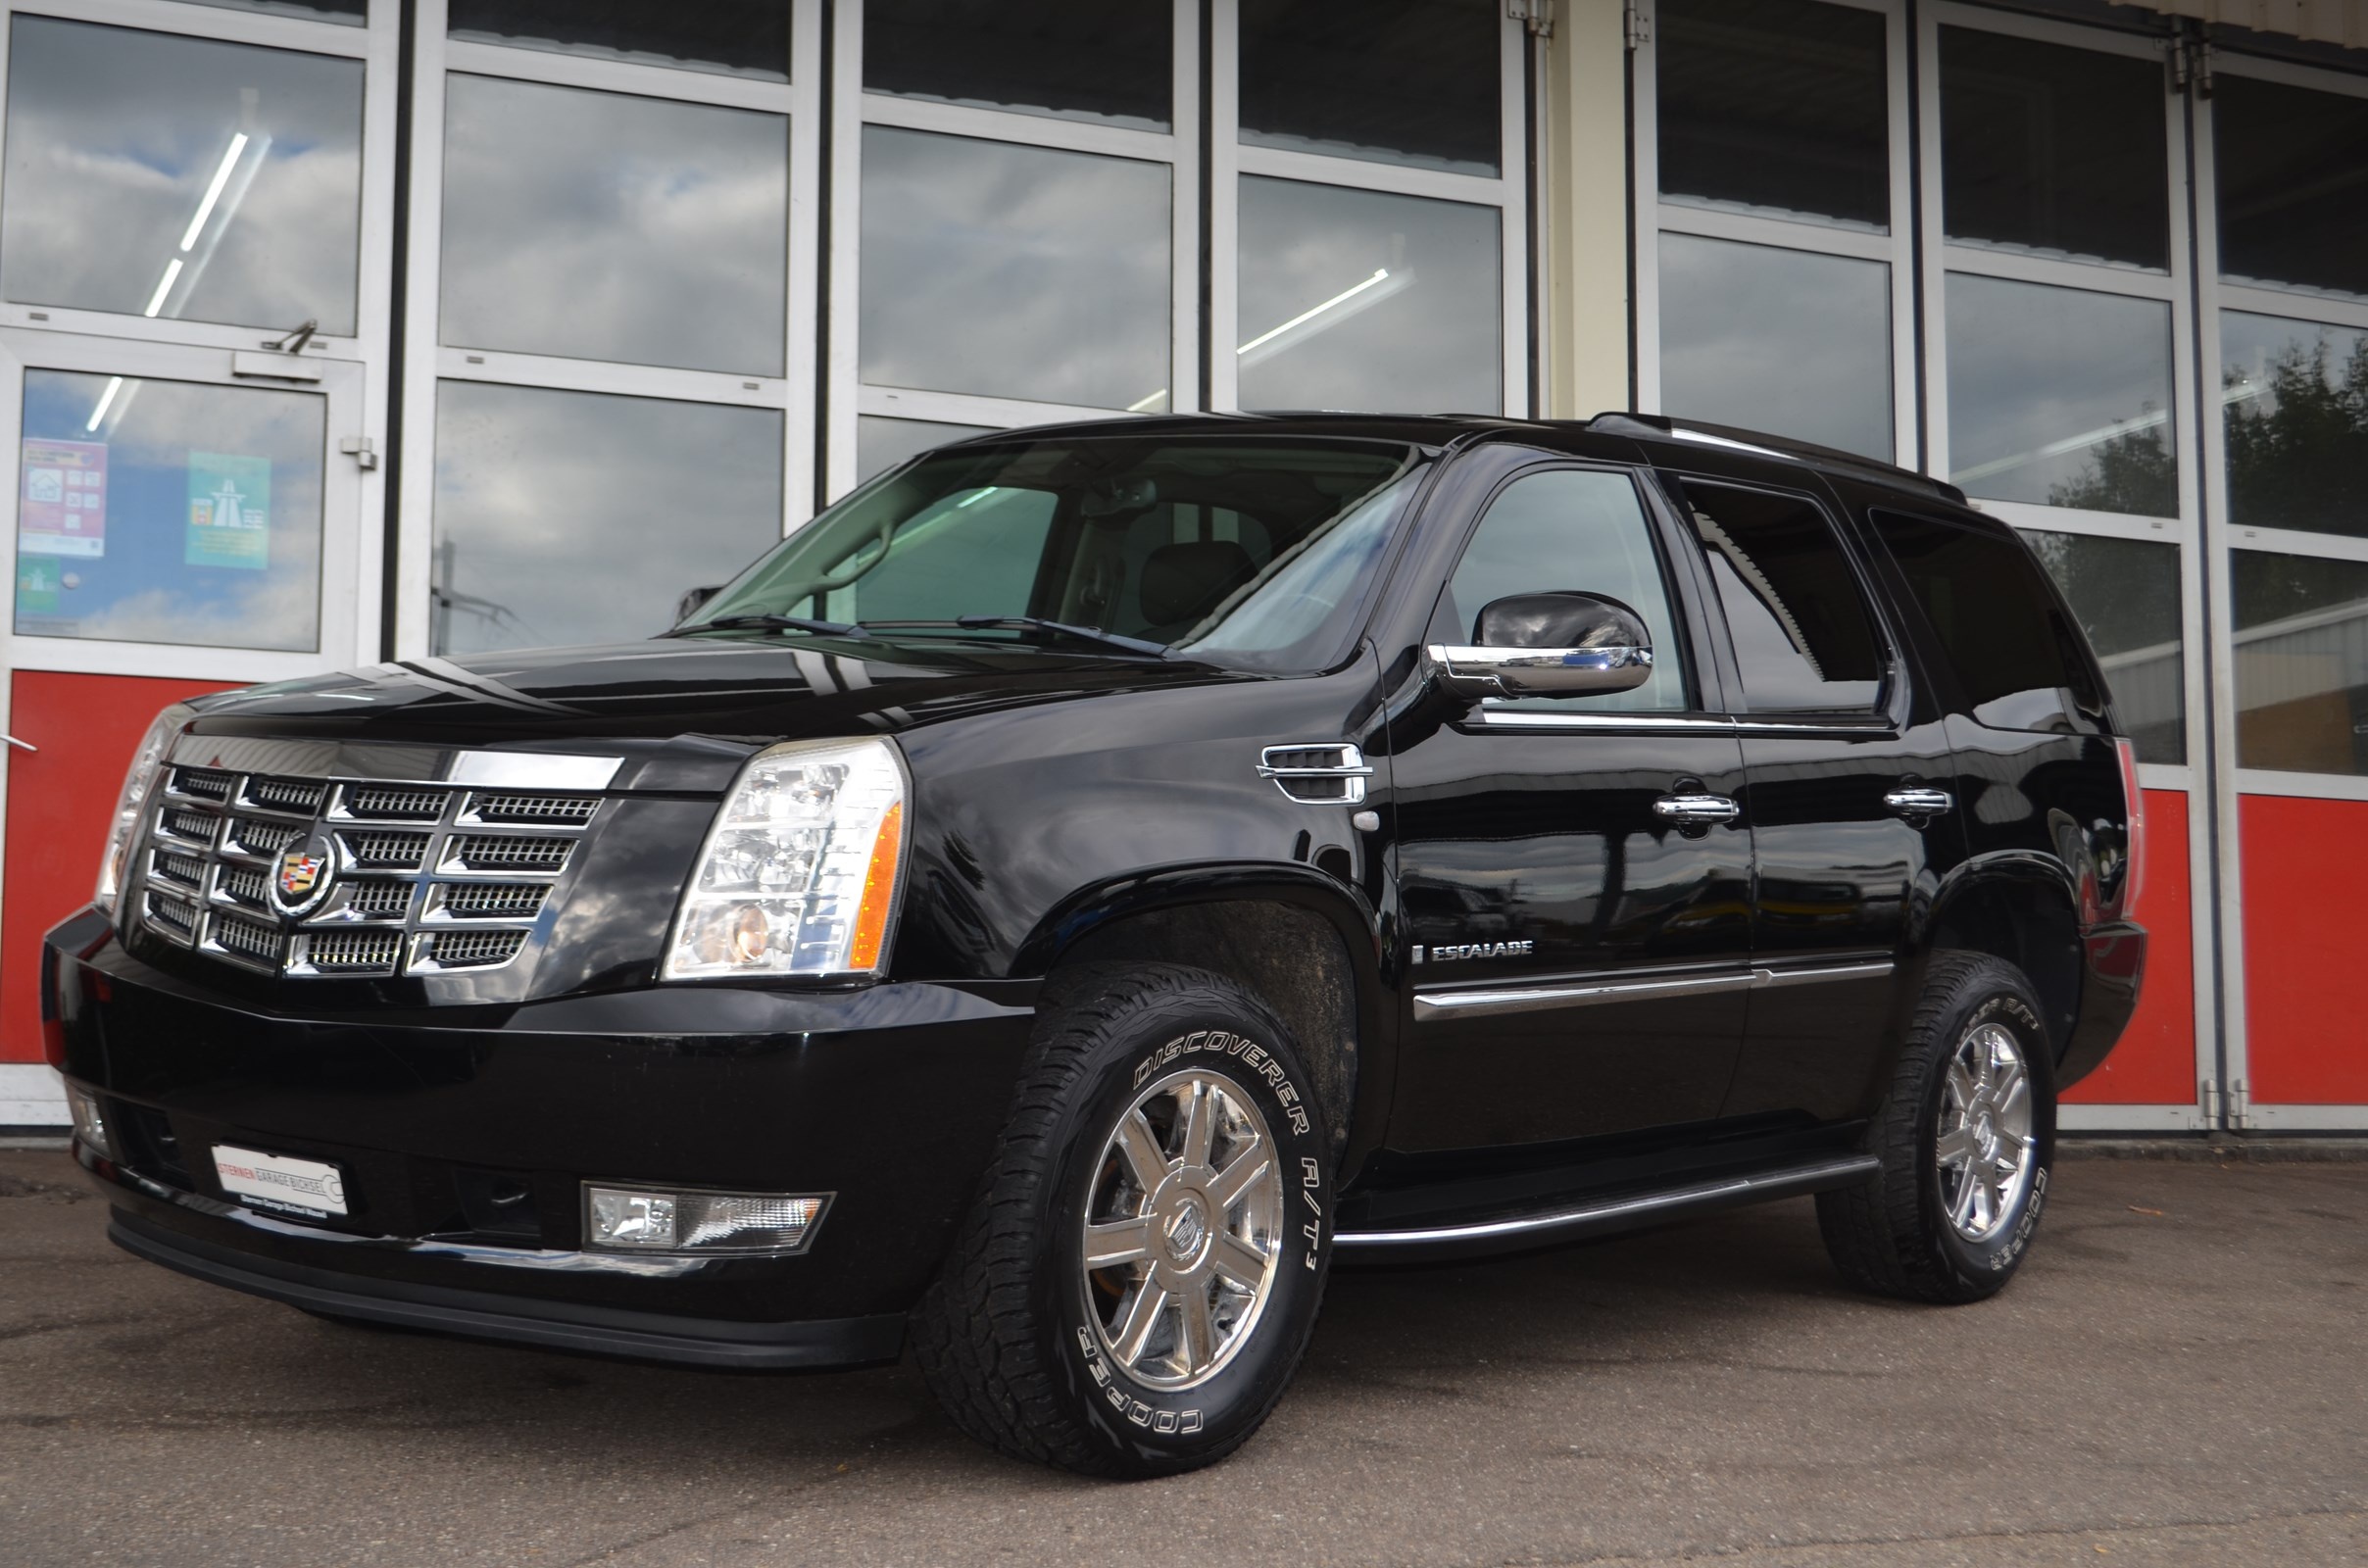 Cadillac Escalade, Pre-owned luxury, Impeccable quality, Unmatched reliability, 2420x1600 HD Desktop